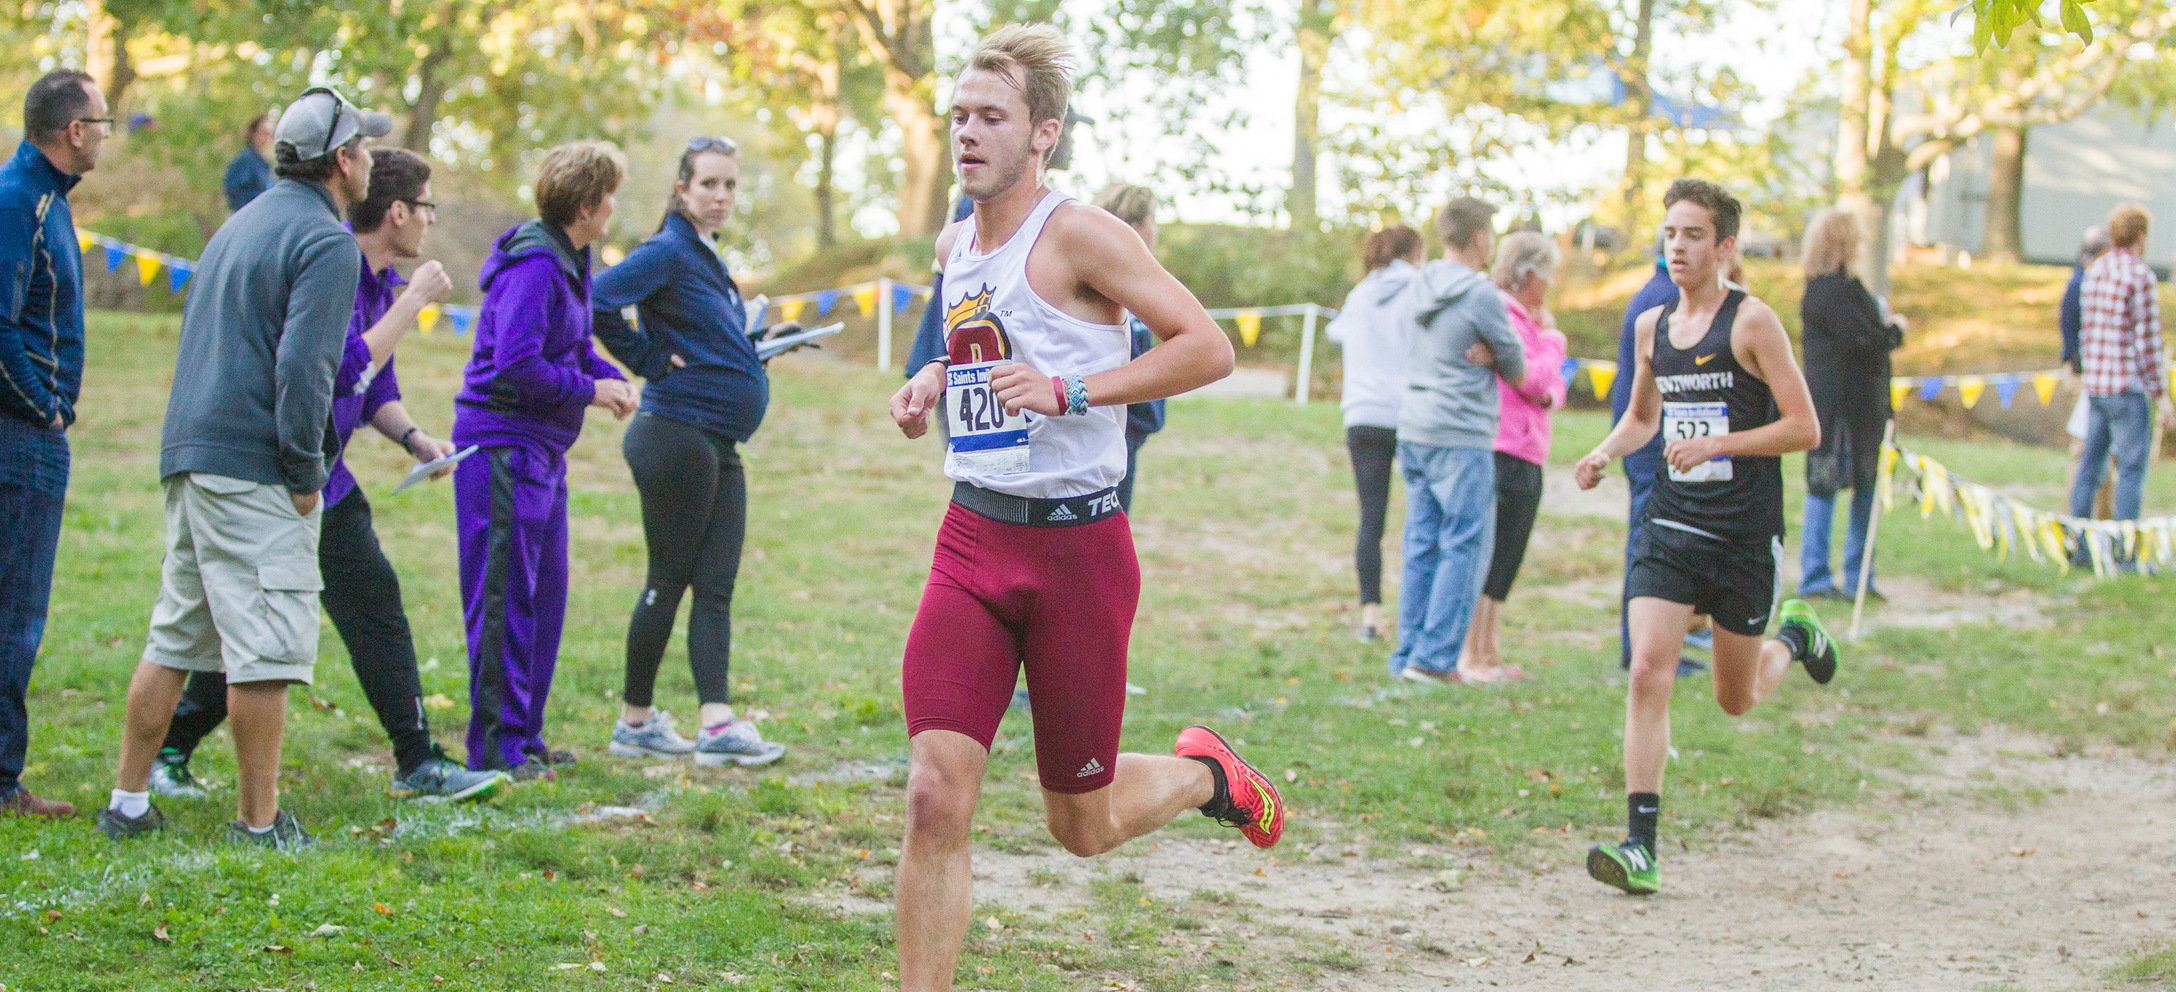 Regis Men’s Cross Country Finishes Third at Wellesley Invitational